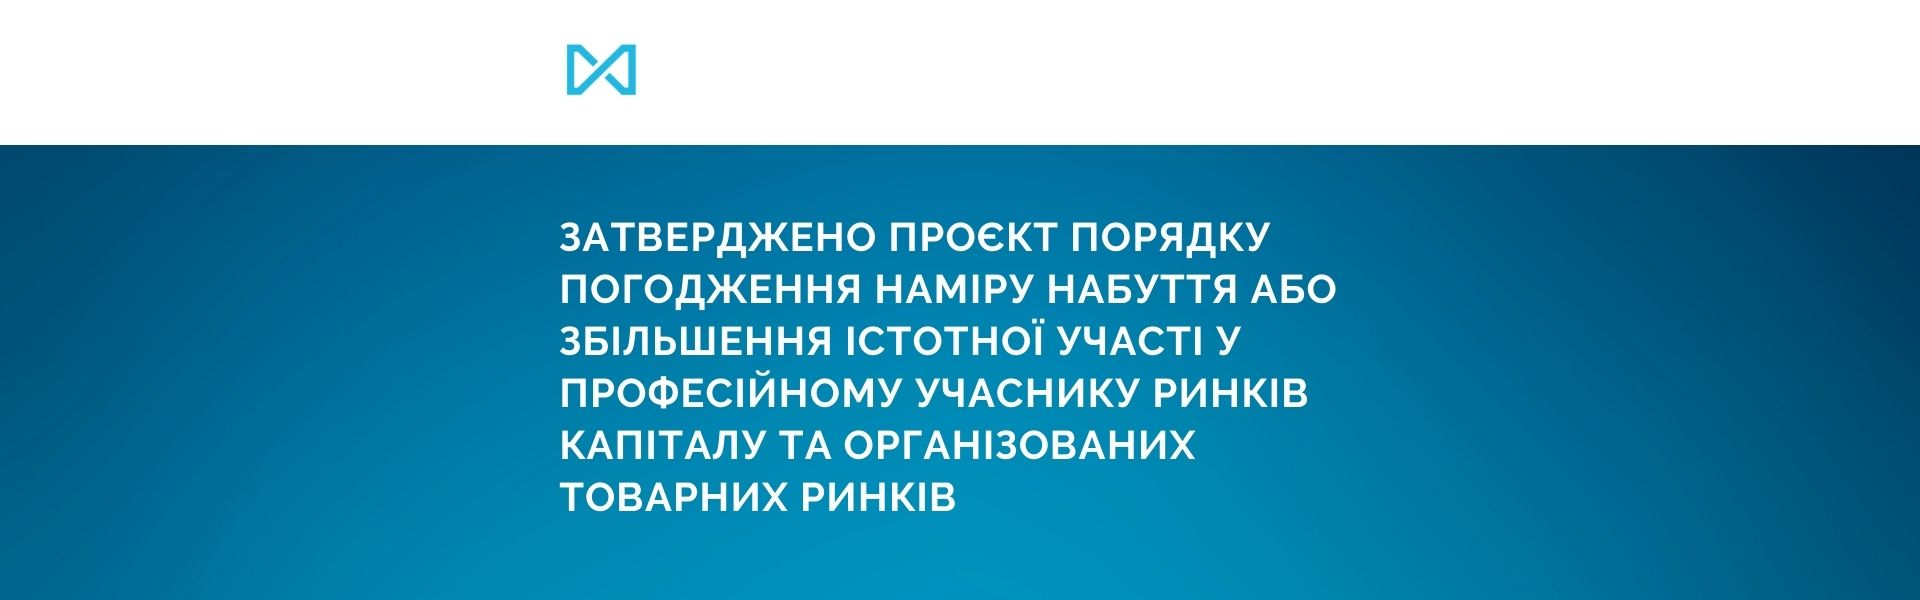 The draft of the order on approval of the intention to acquire or increase the significant participation interest in the professional participant of capital markets and organized commodity markets has been approved 